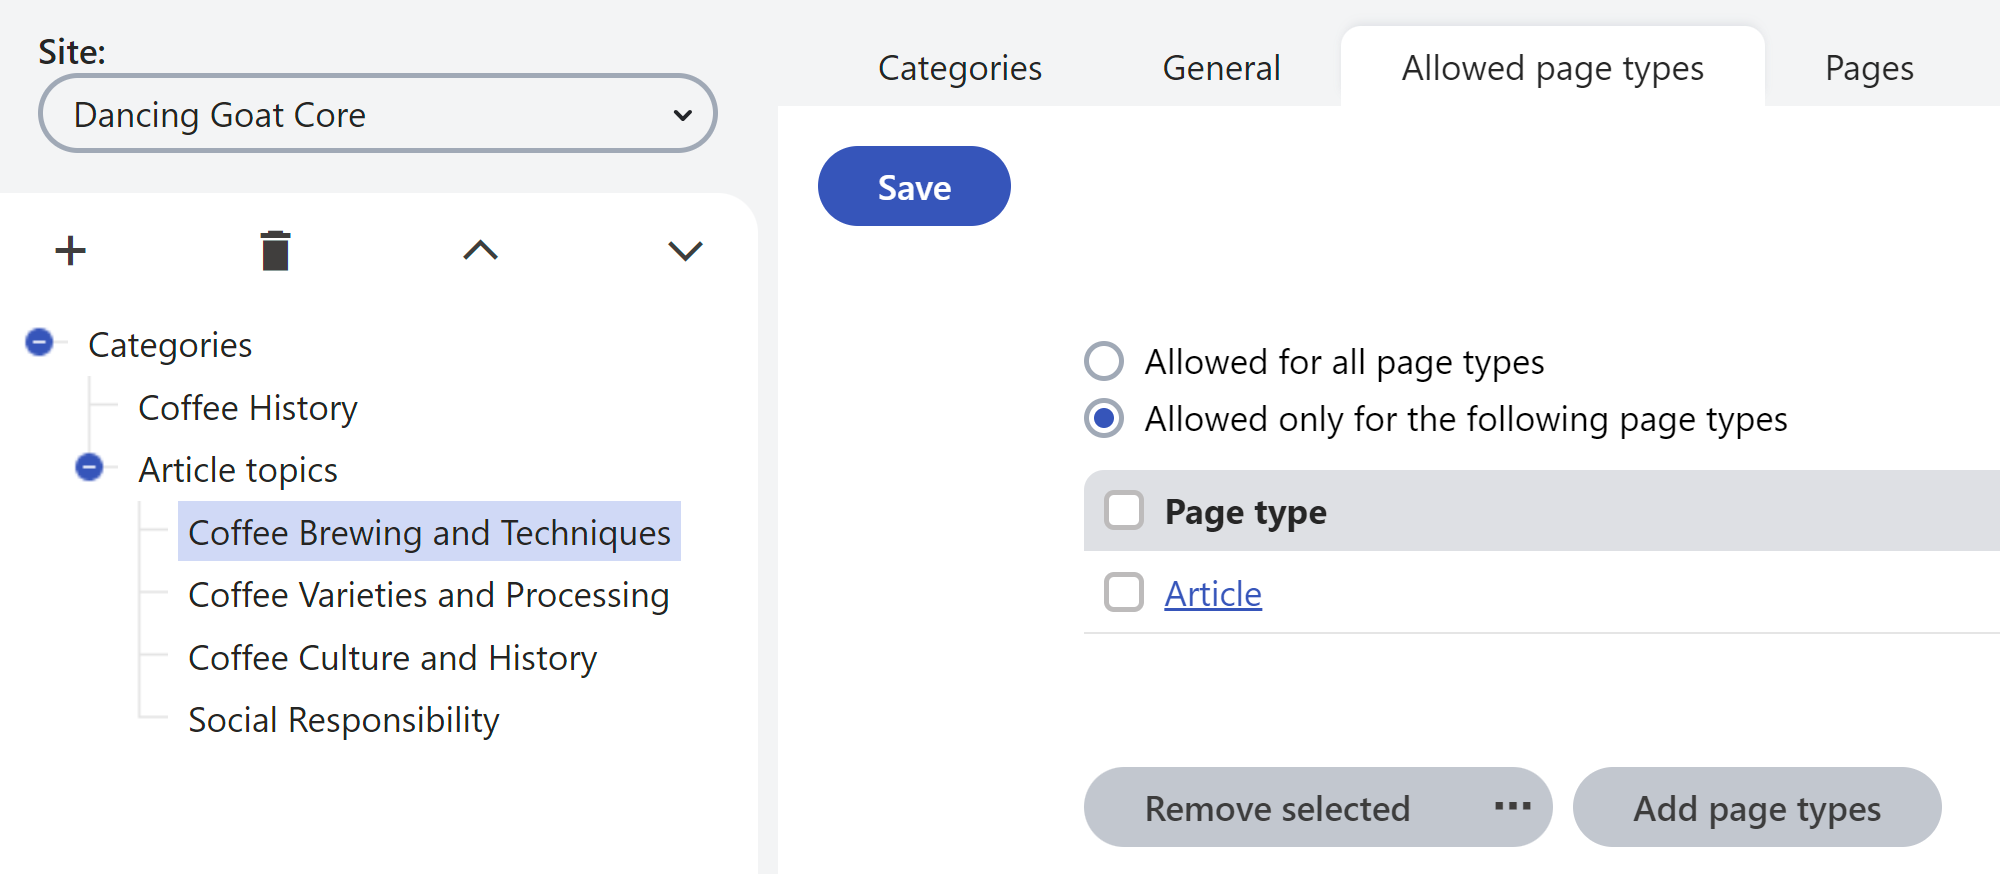 Allowed page types tab